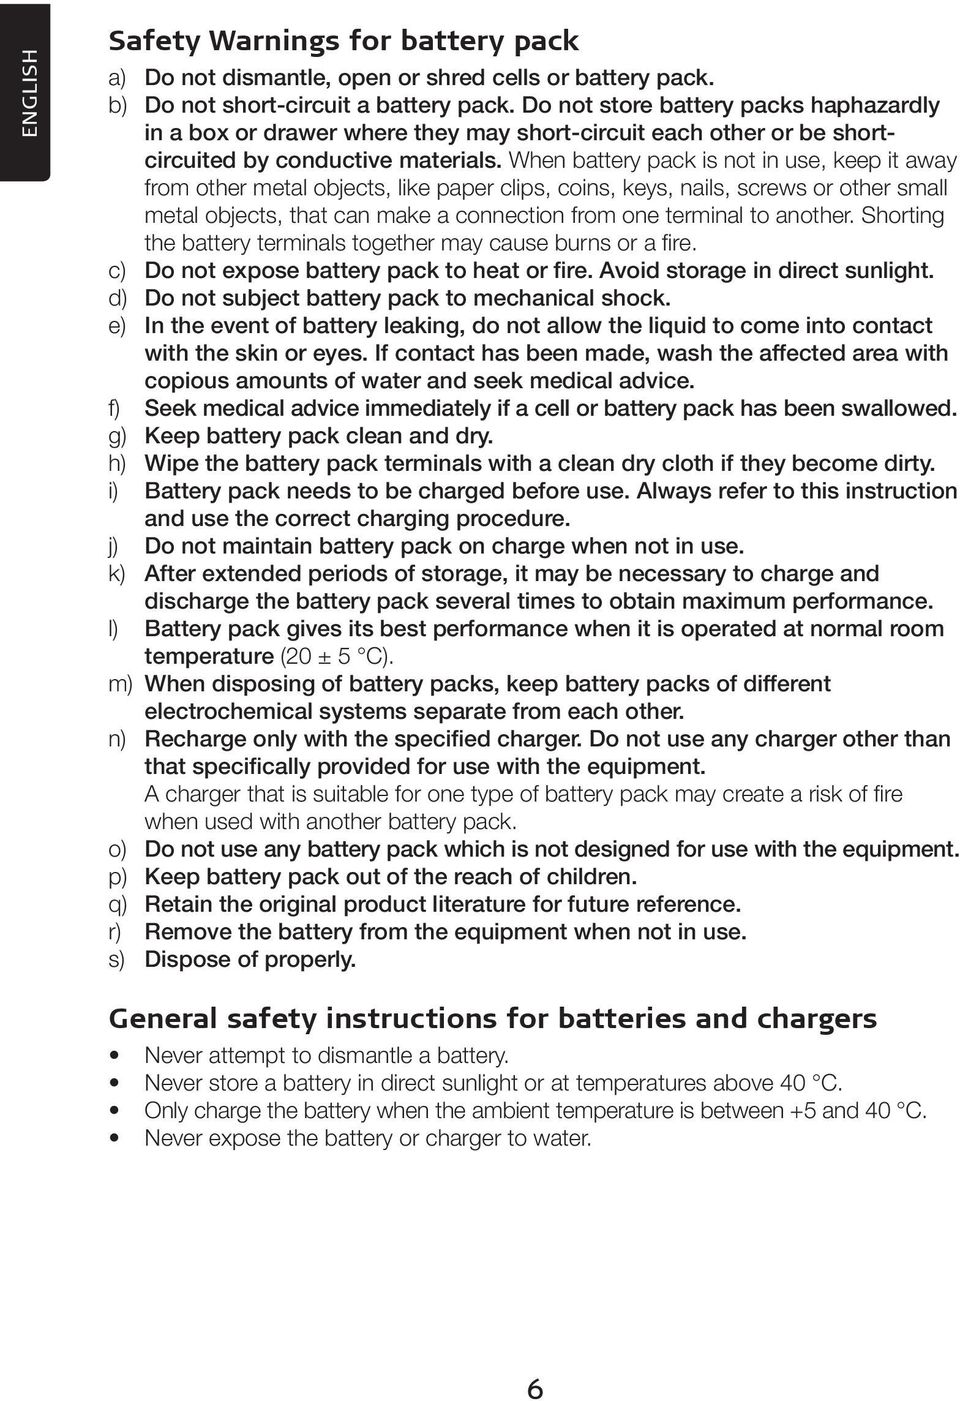 When battery pack is not in use, keep it away from other metal objects, like paper clips, coins, keys, nails, screws or other small metal objects, that can make a connection from one terminal to